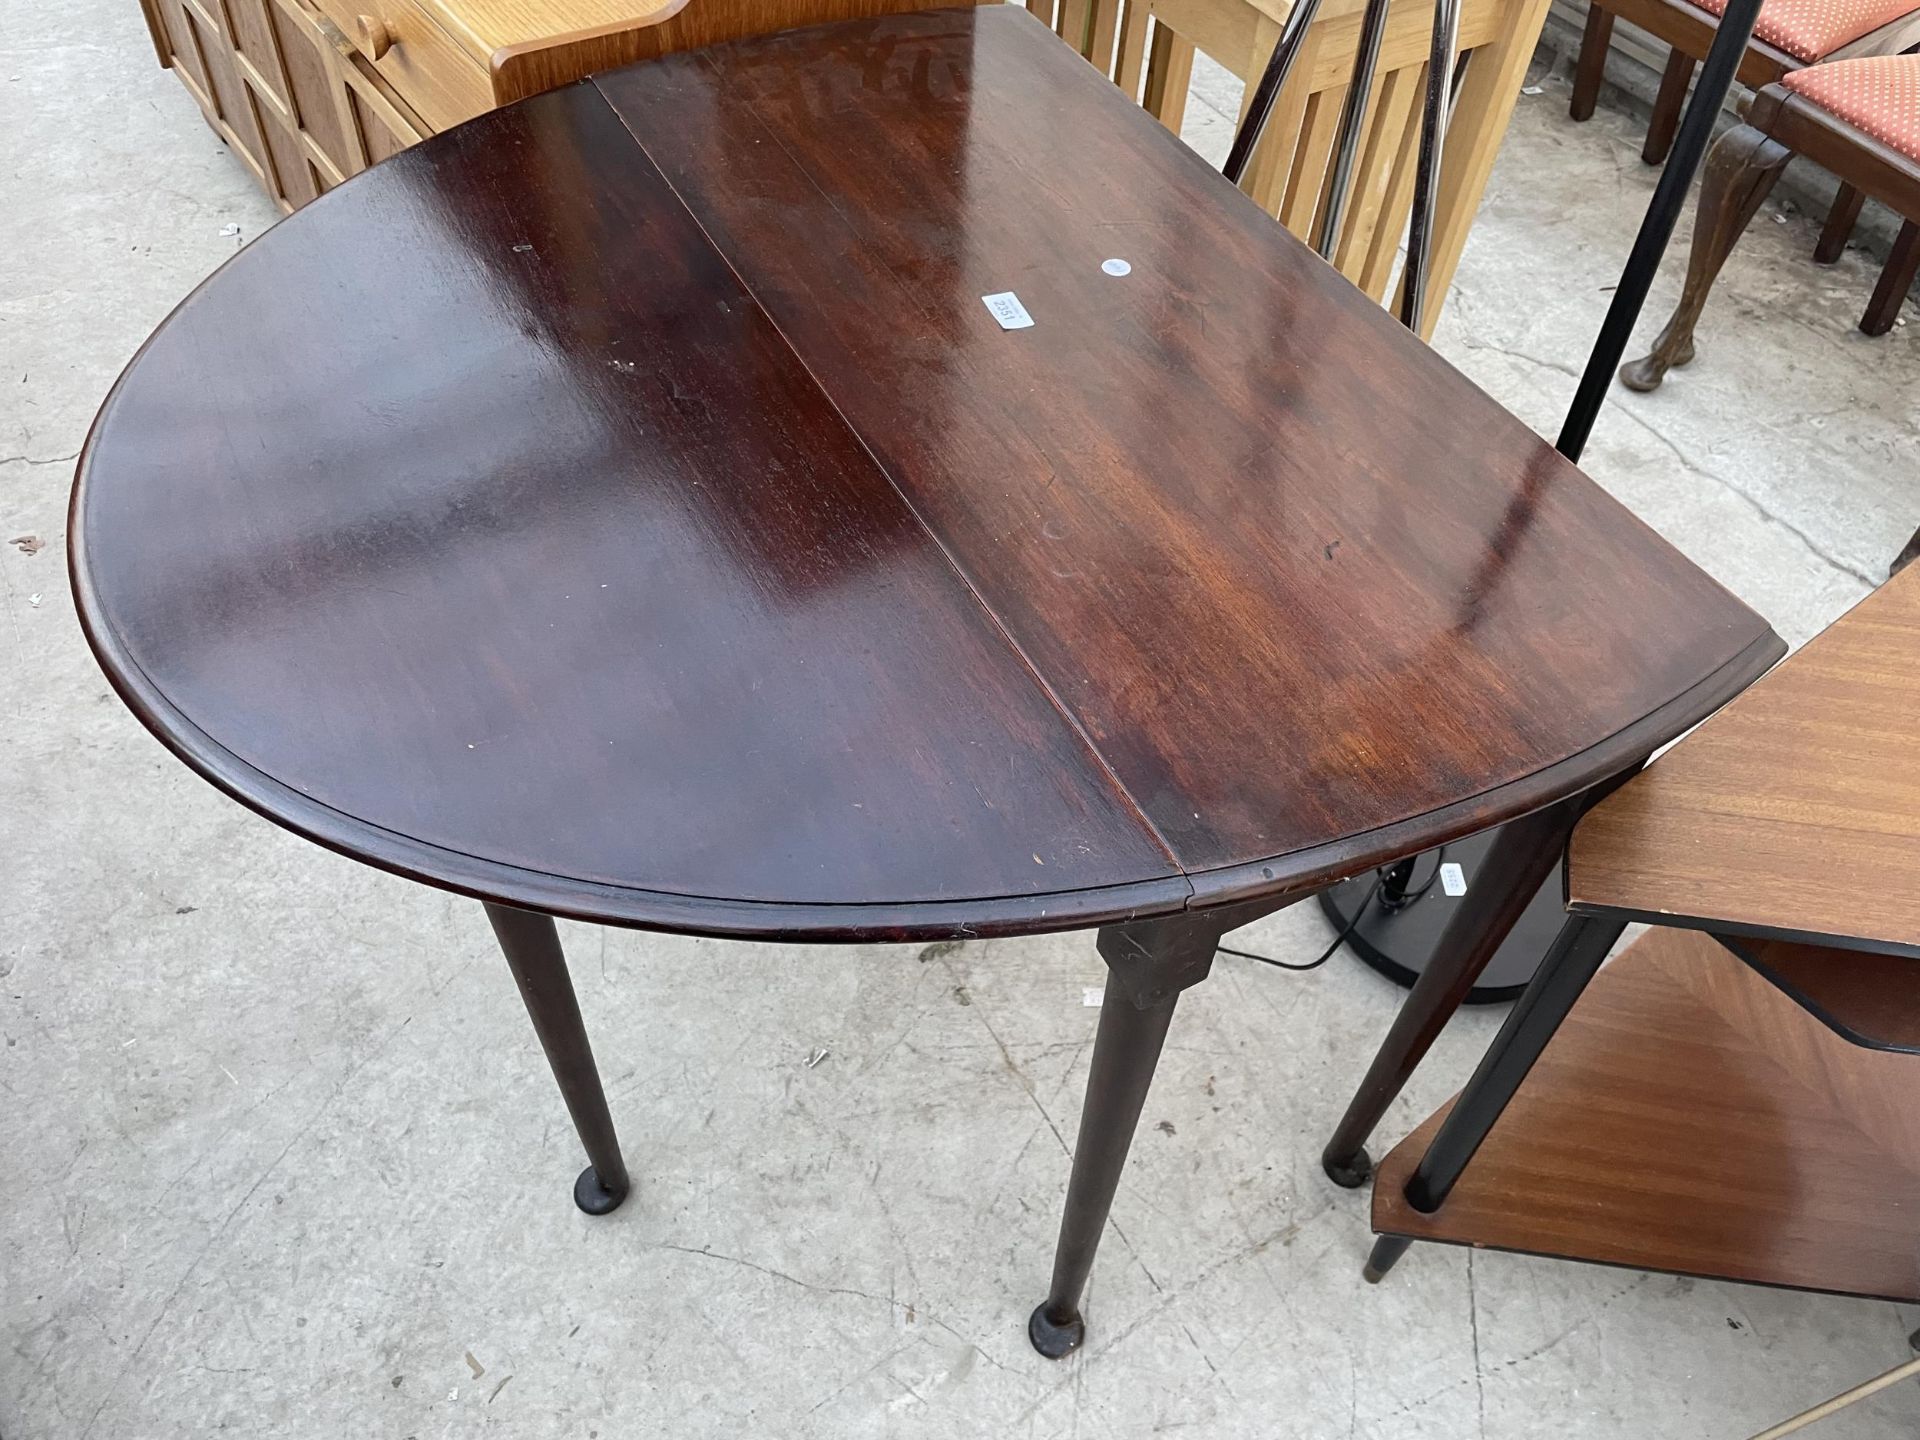 A 19TH CENTURY OVAL DROP-LEAF DINING TABLE ON TAPERING LEGS, WITH PAD FEET, 47X35" - Image 3 of 3